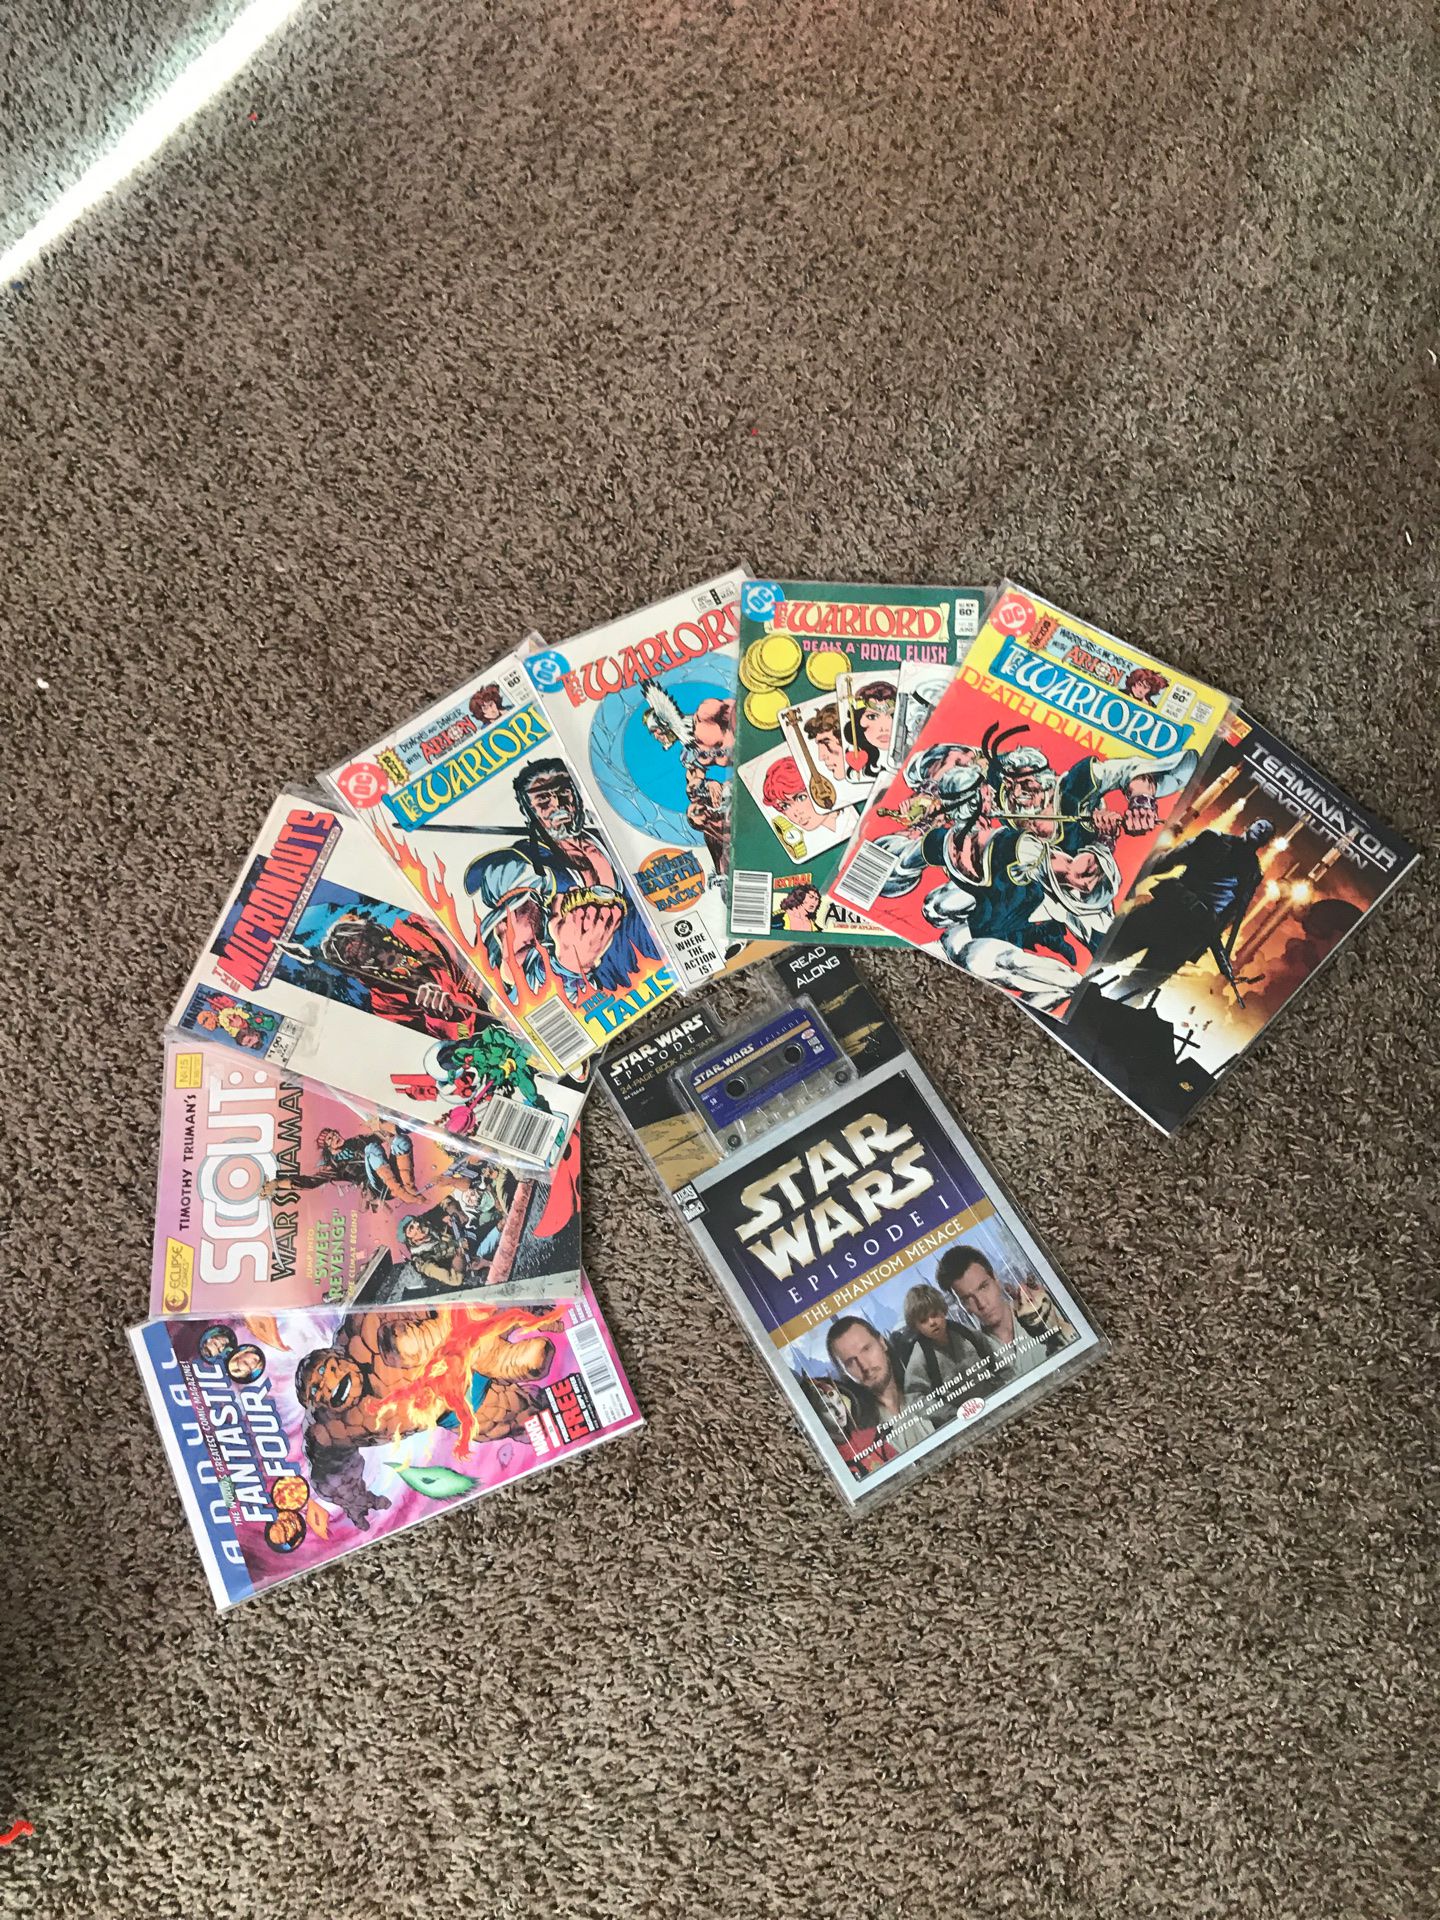 Comic Books & Star Wars Read Along Cassette collectible